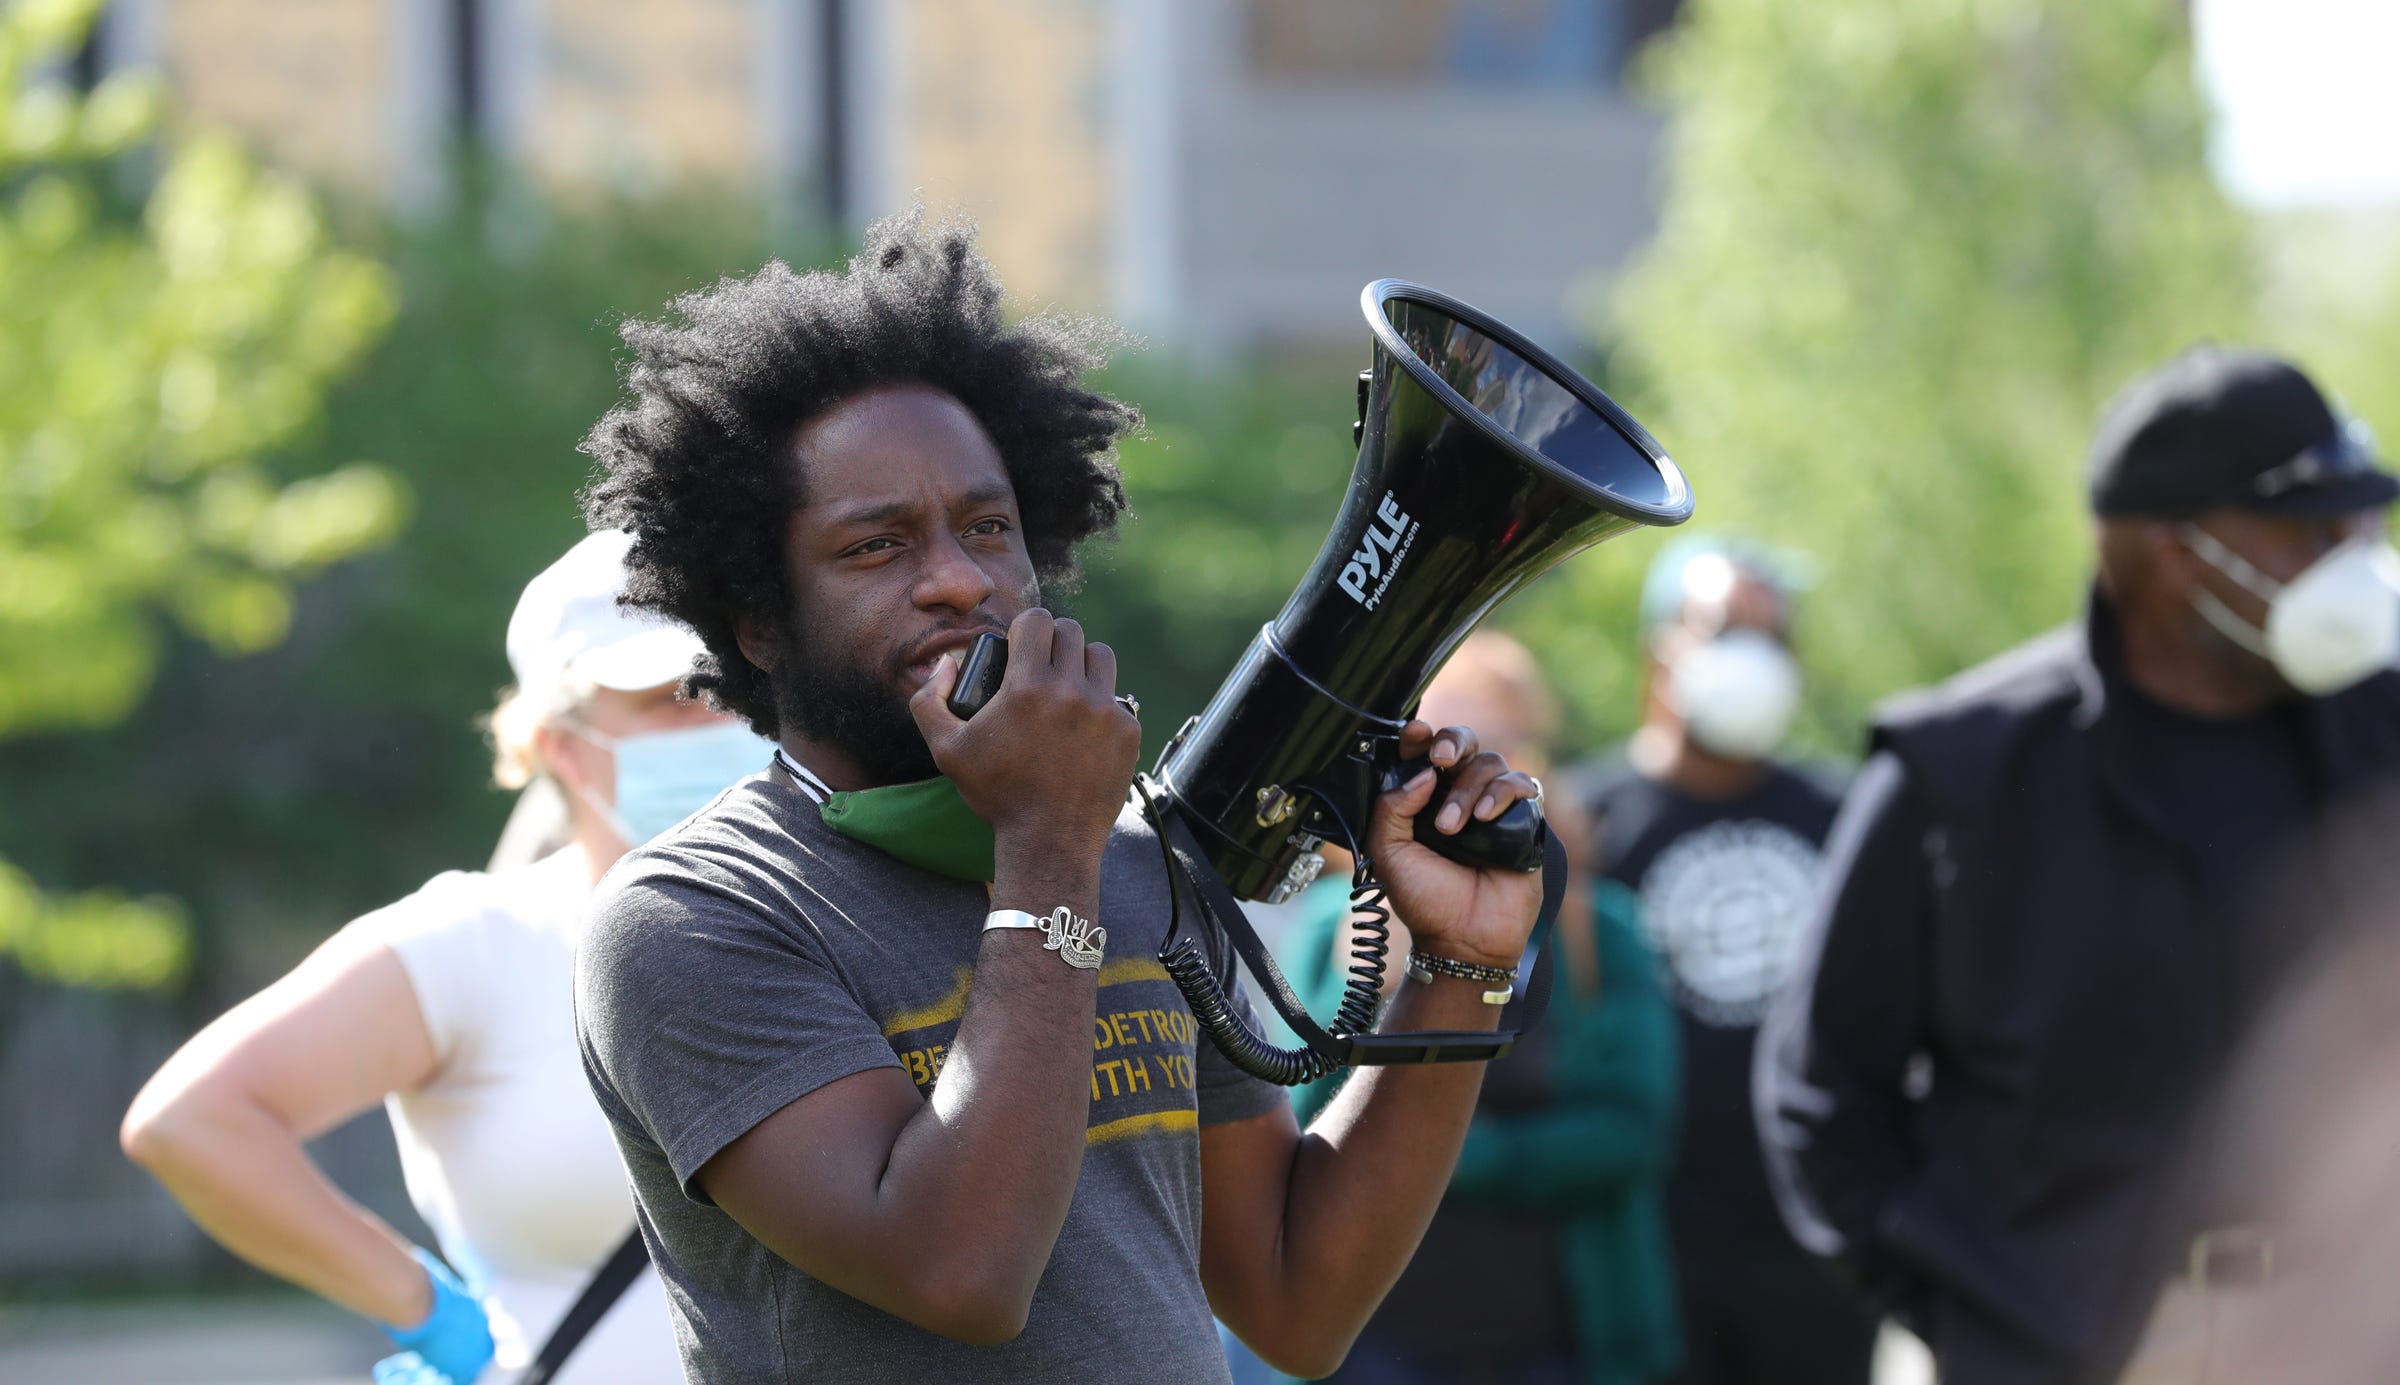 Tristan Taylor talks to protesters gathered in front of the Detroit Public Safety Building. Marchers gathered to protest police brutality and the death of George Floyd on Saturday, May 30, 2020 in Detroit. They marched down Michigan Avenue towards Clark Park.